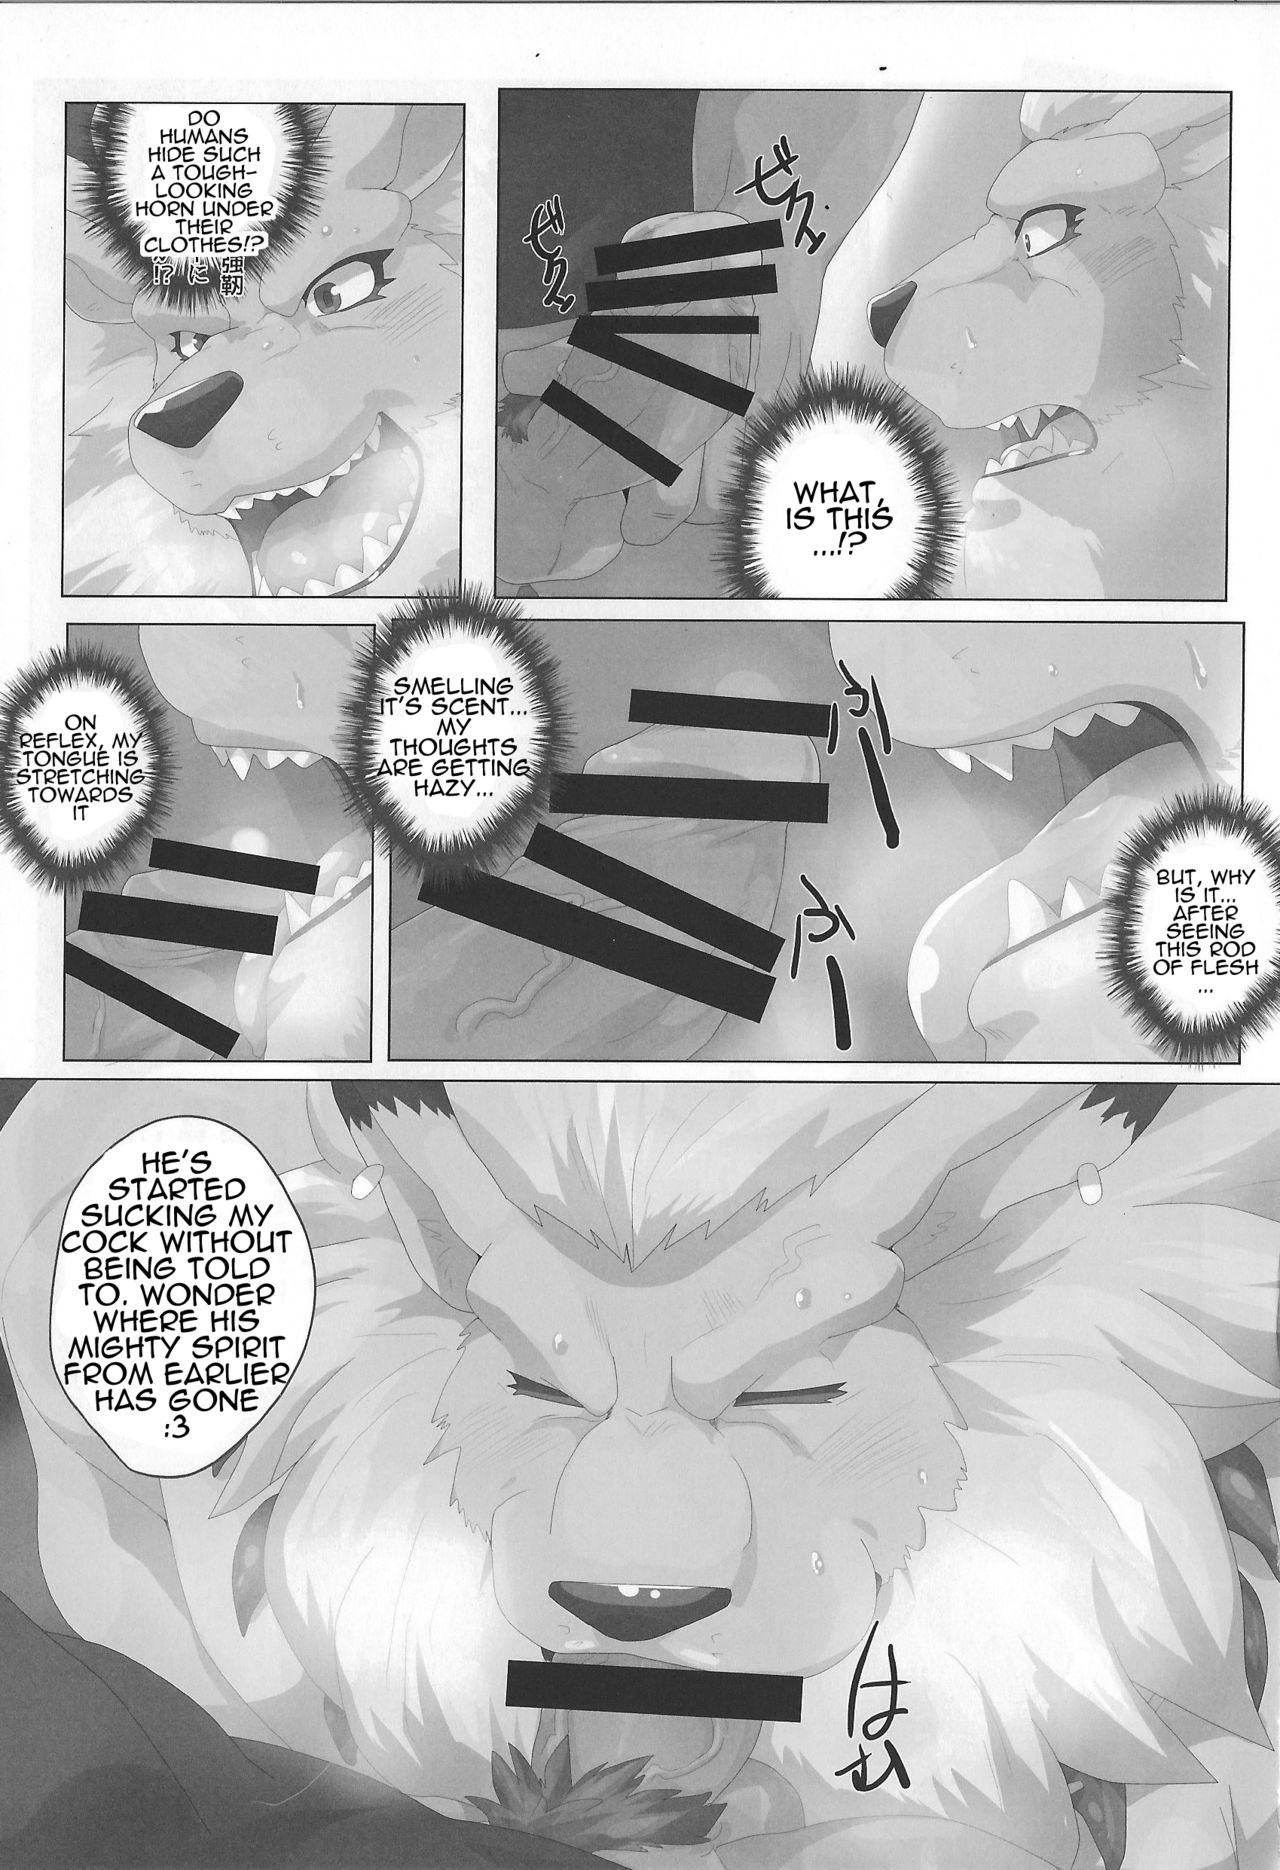 [Debirobu] For the Lion-Man Type Electric Life Form to Overturn Fate - Leomon Doujin [ENG] 10